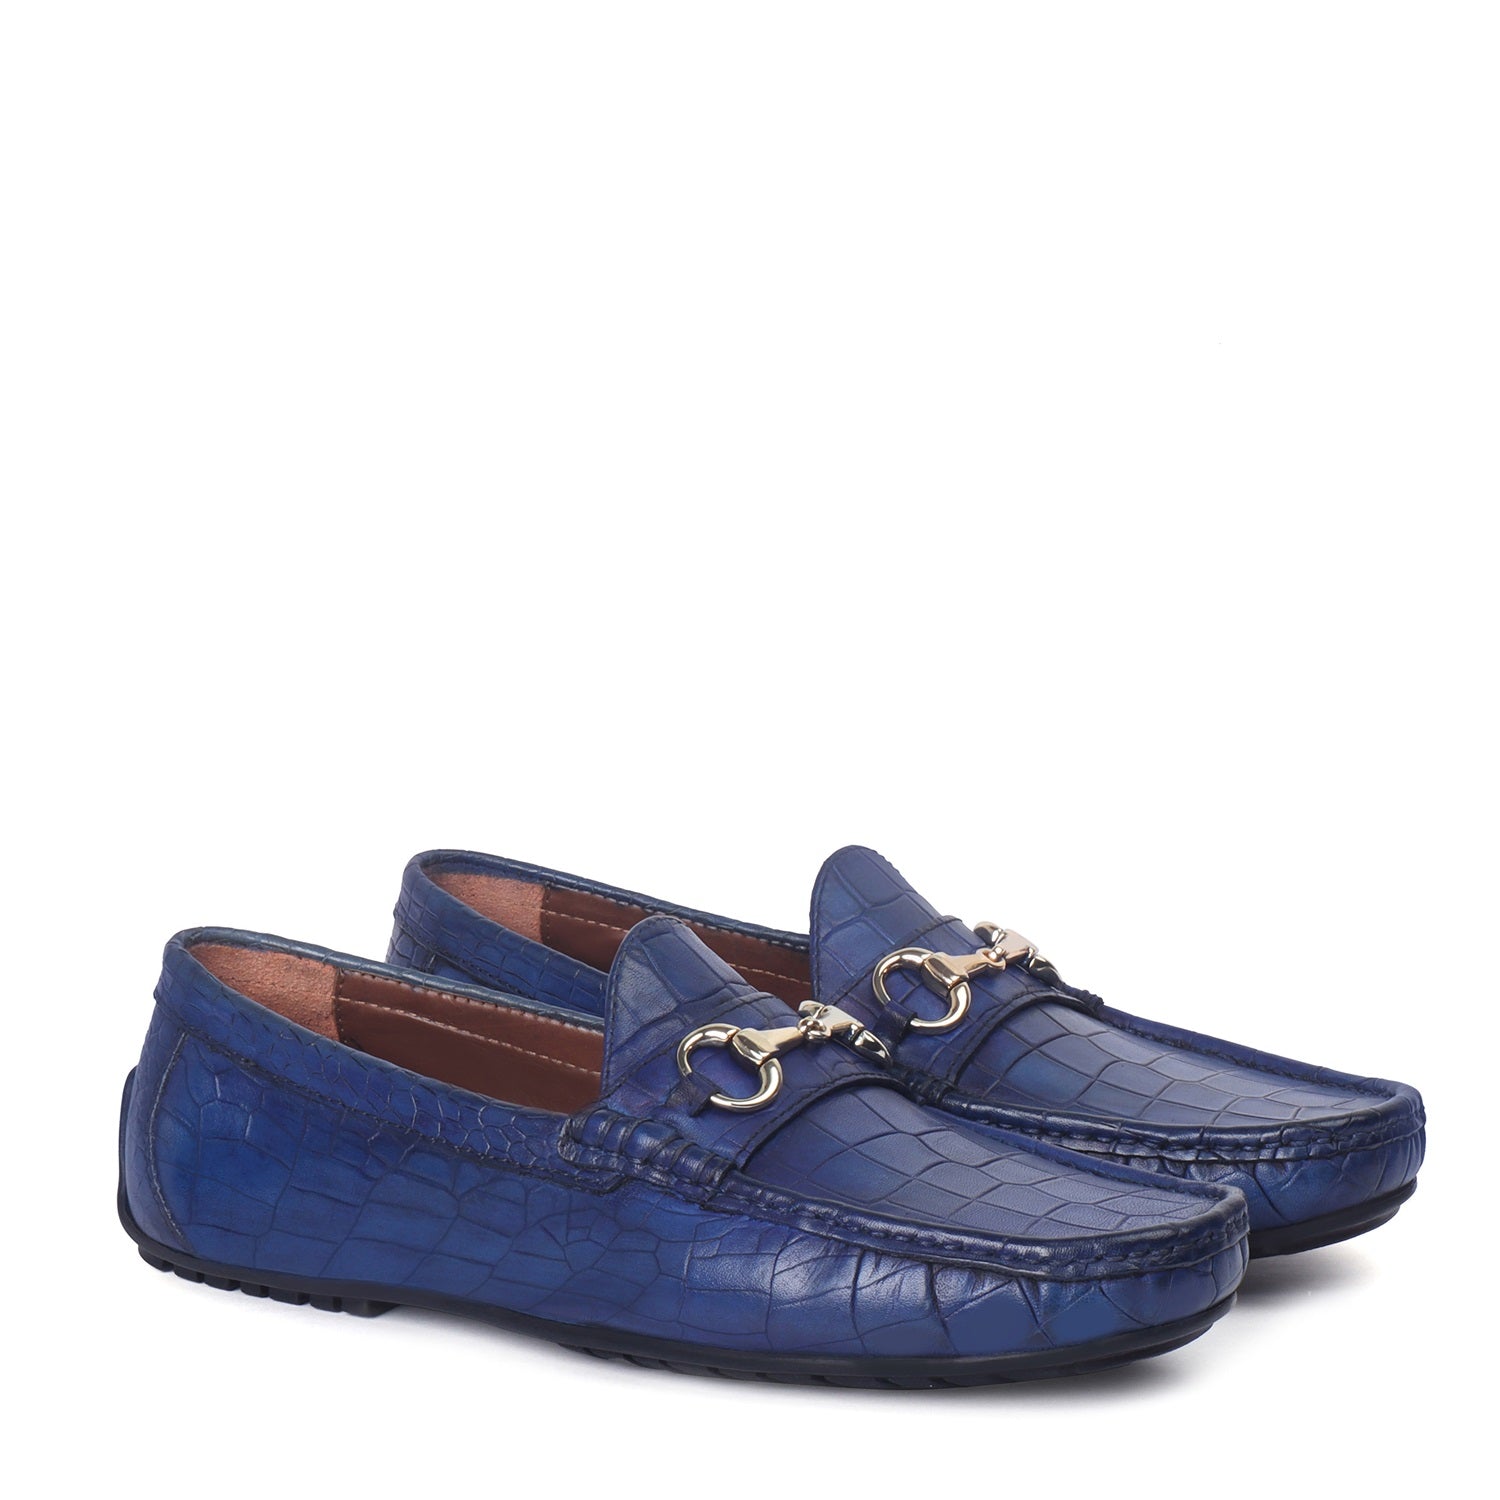 Blue Croco Textured Leather Loafer With Horse-bit Buckle